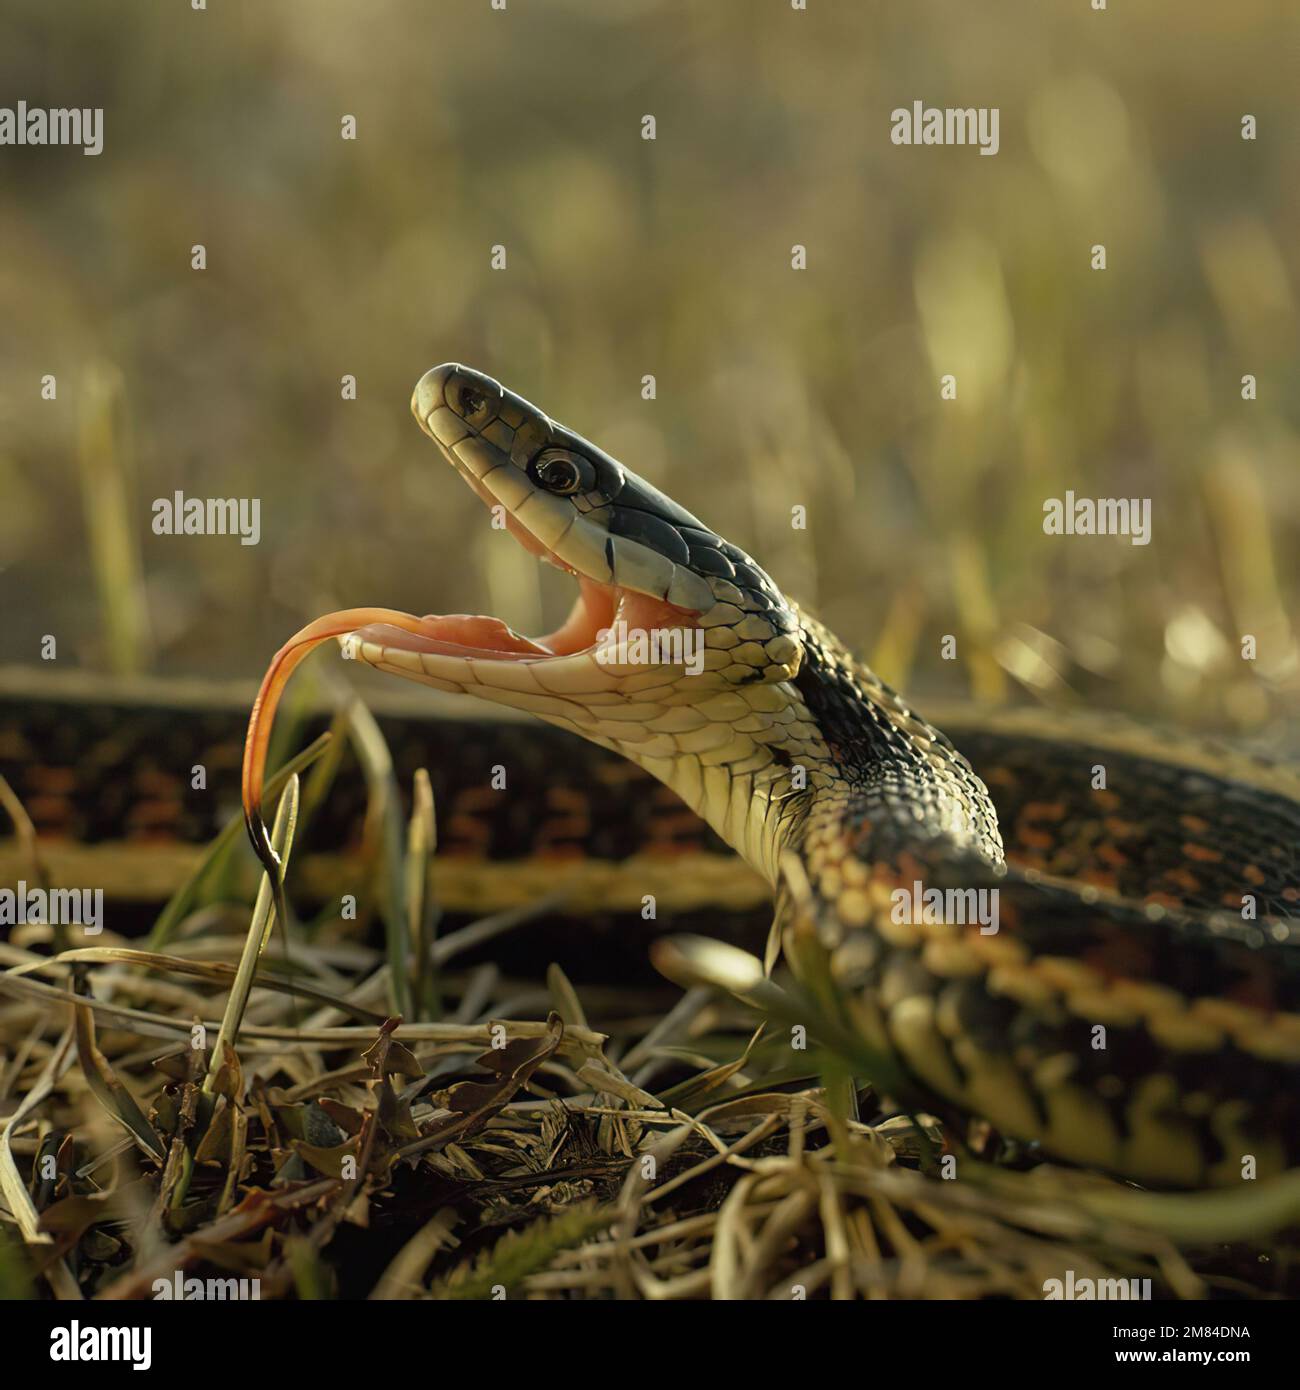 snake sitting with gaping mouth Stock Photo